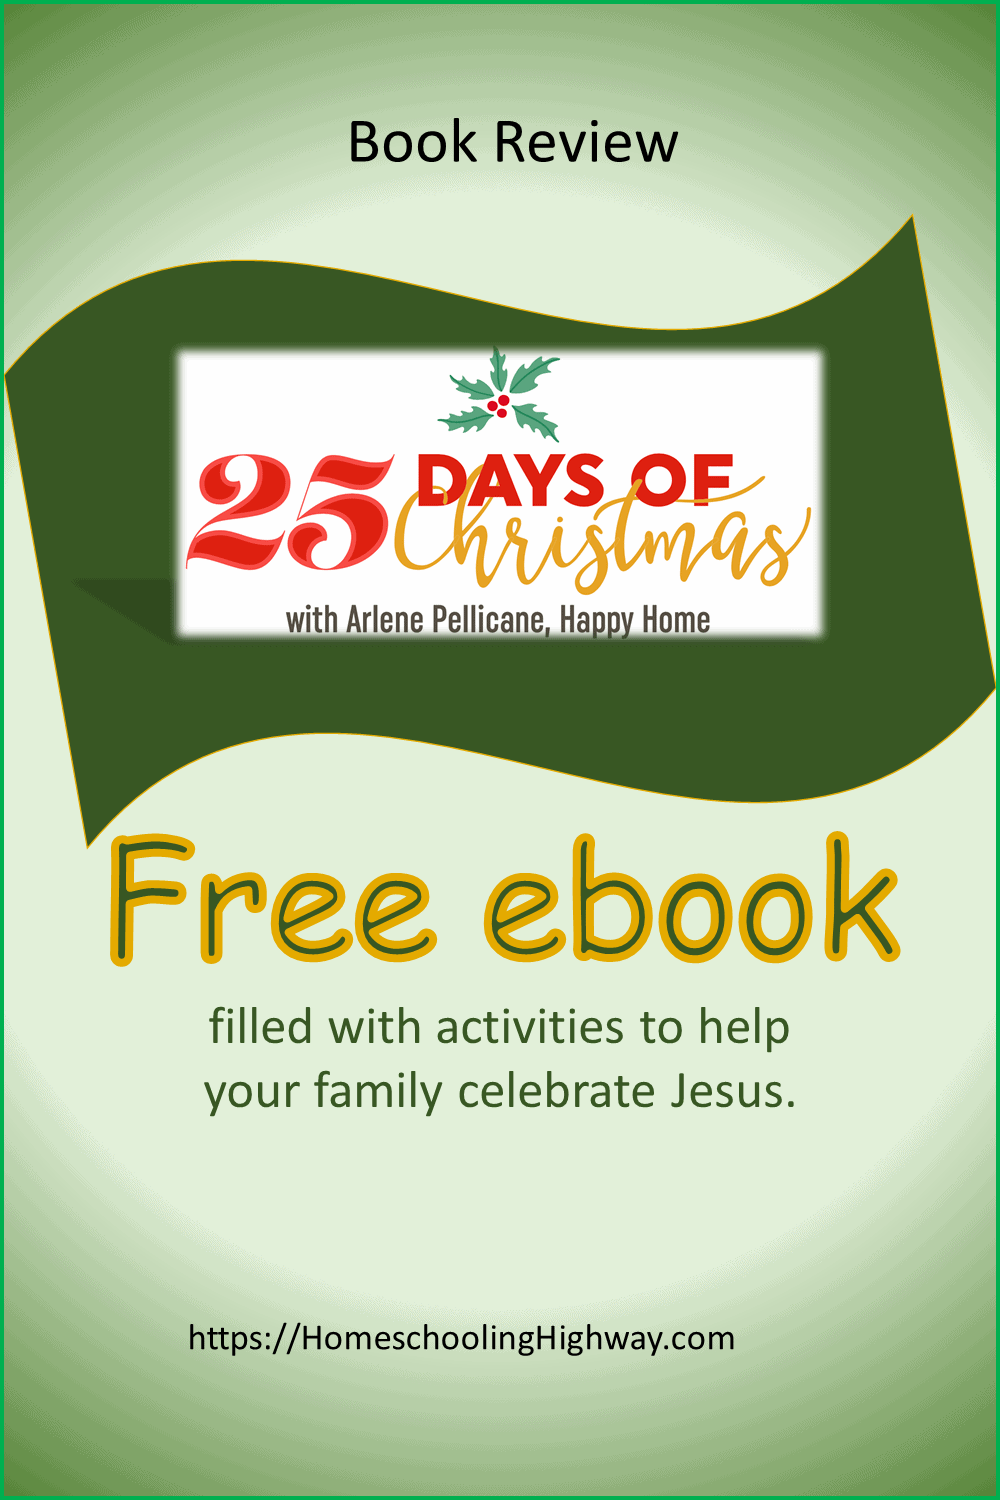 25 Days of Christmas an ebook review by Homeschooling Highway